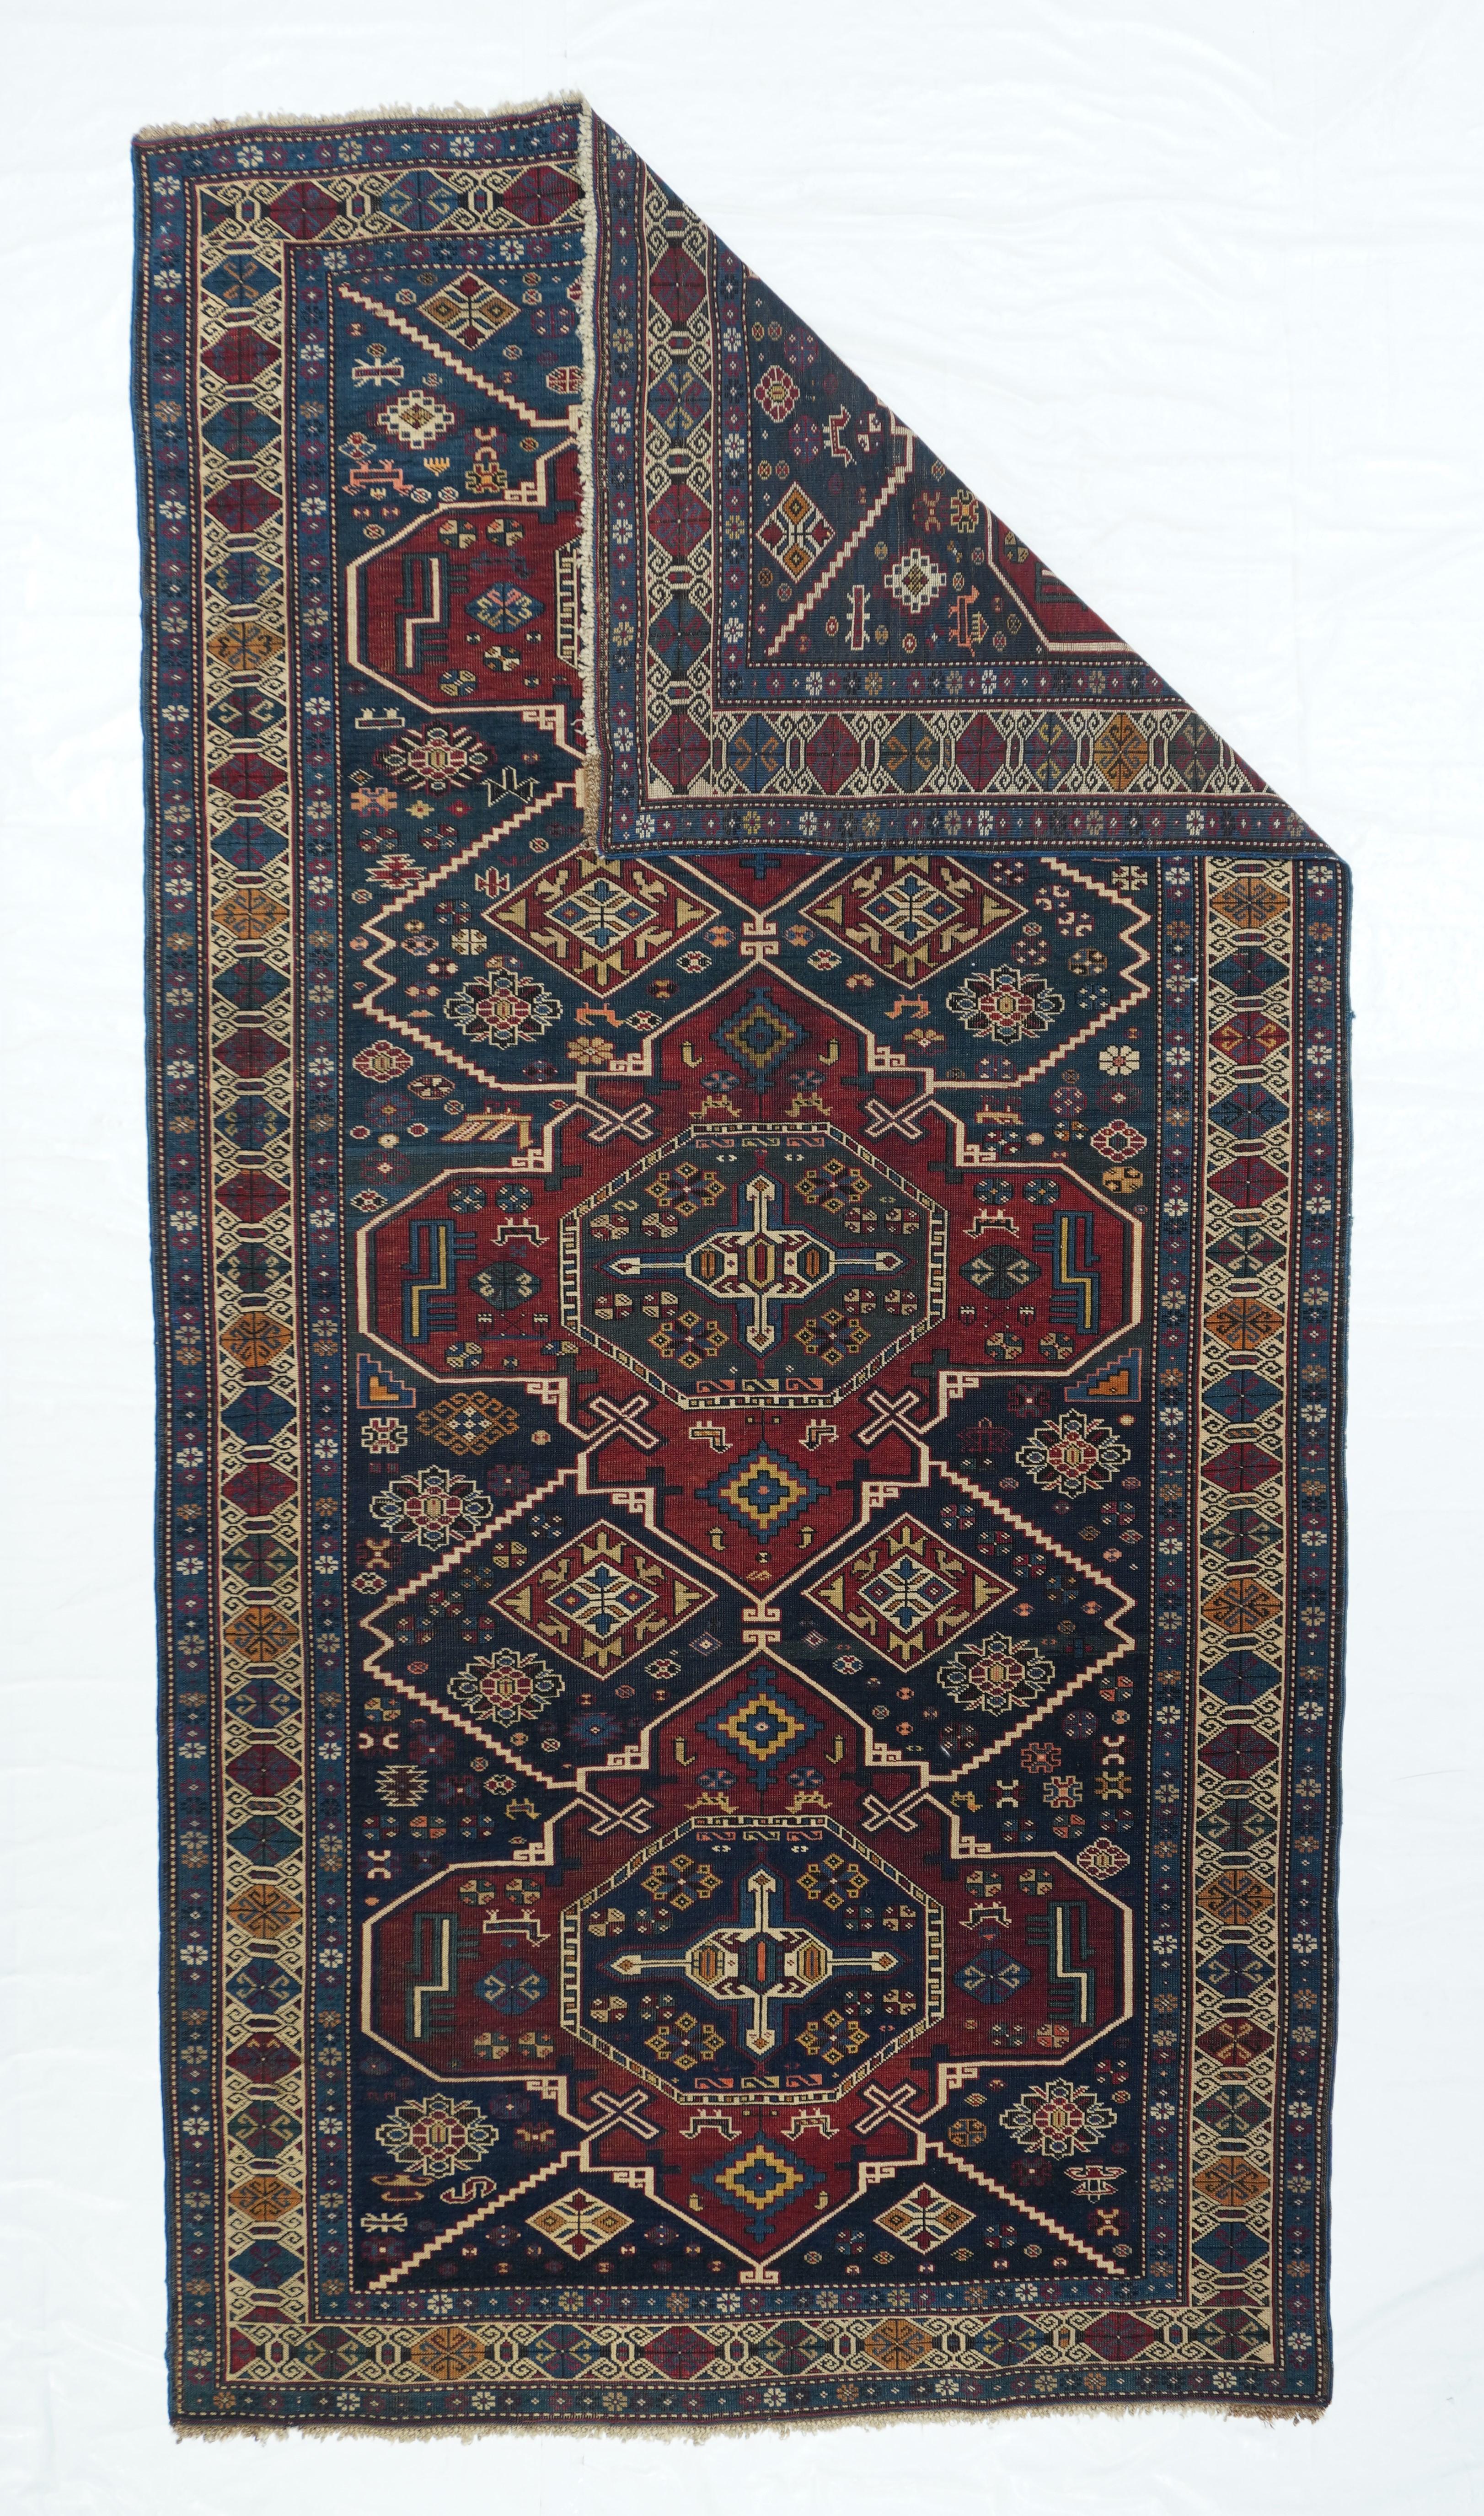 Antique Shrivan rug measures 4'4'' x 8'5''. With a beige wool warp more often attributed to Kuba in the eastern Caucasus, this village Kellegi (long rug) shows three red Soumak-style reticulated medallions linked by Navy reserves and stepped bent